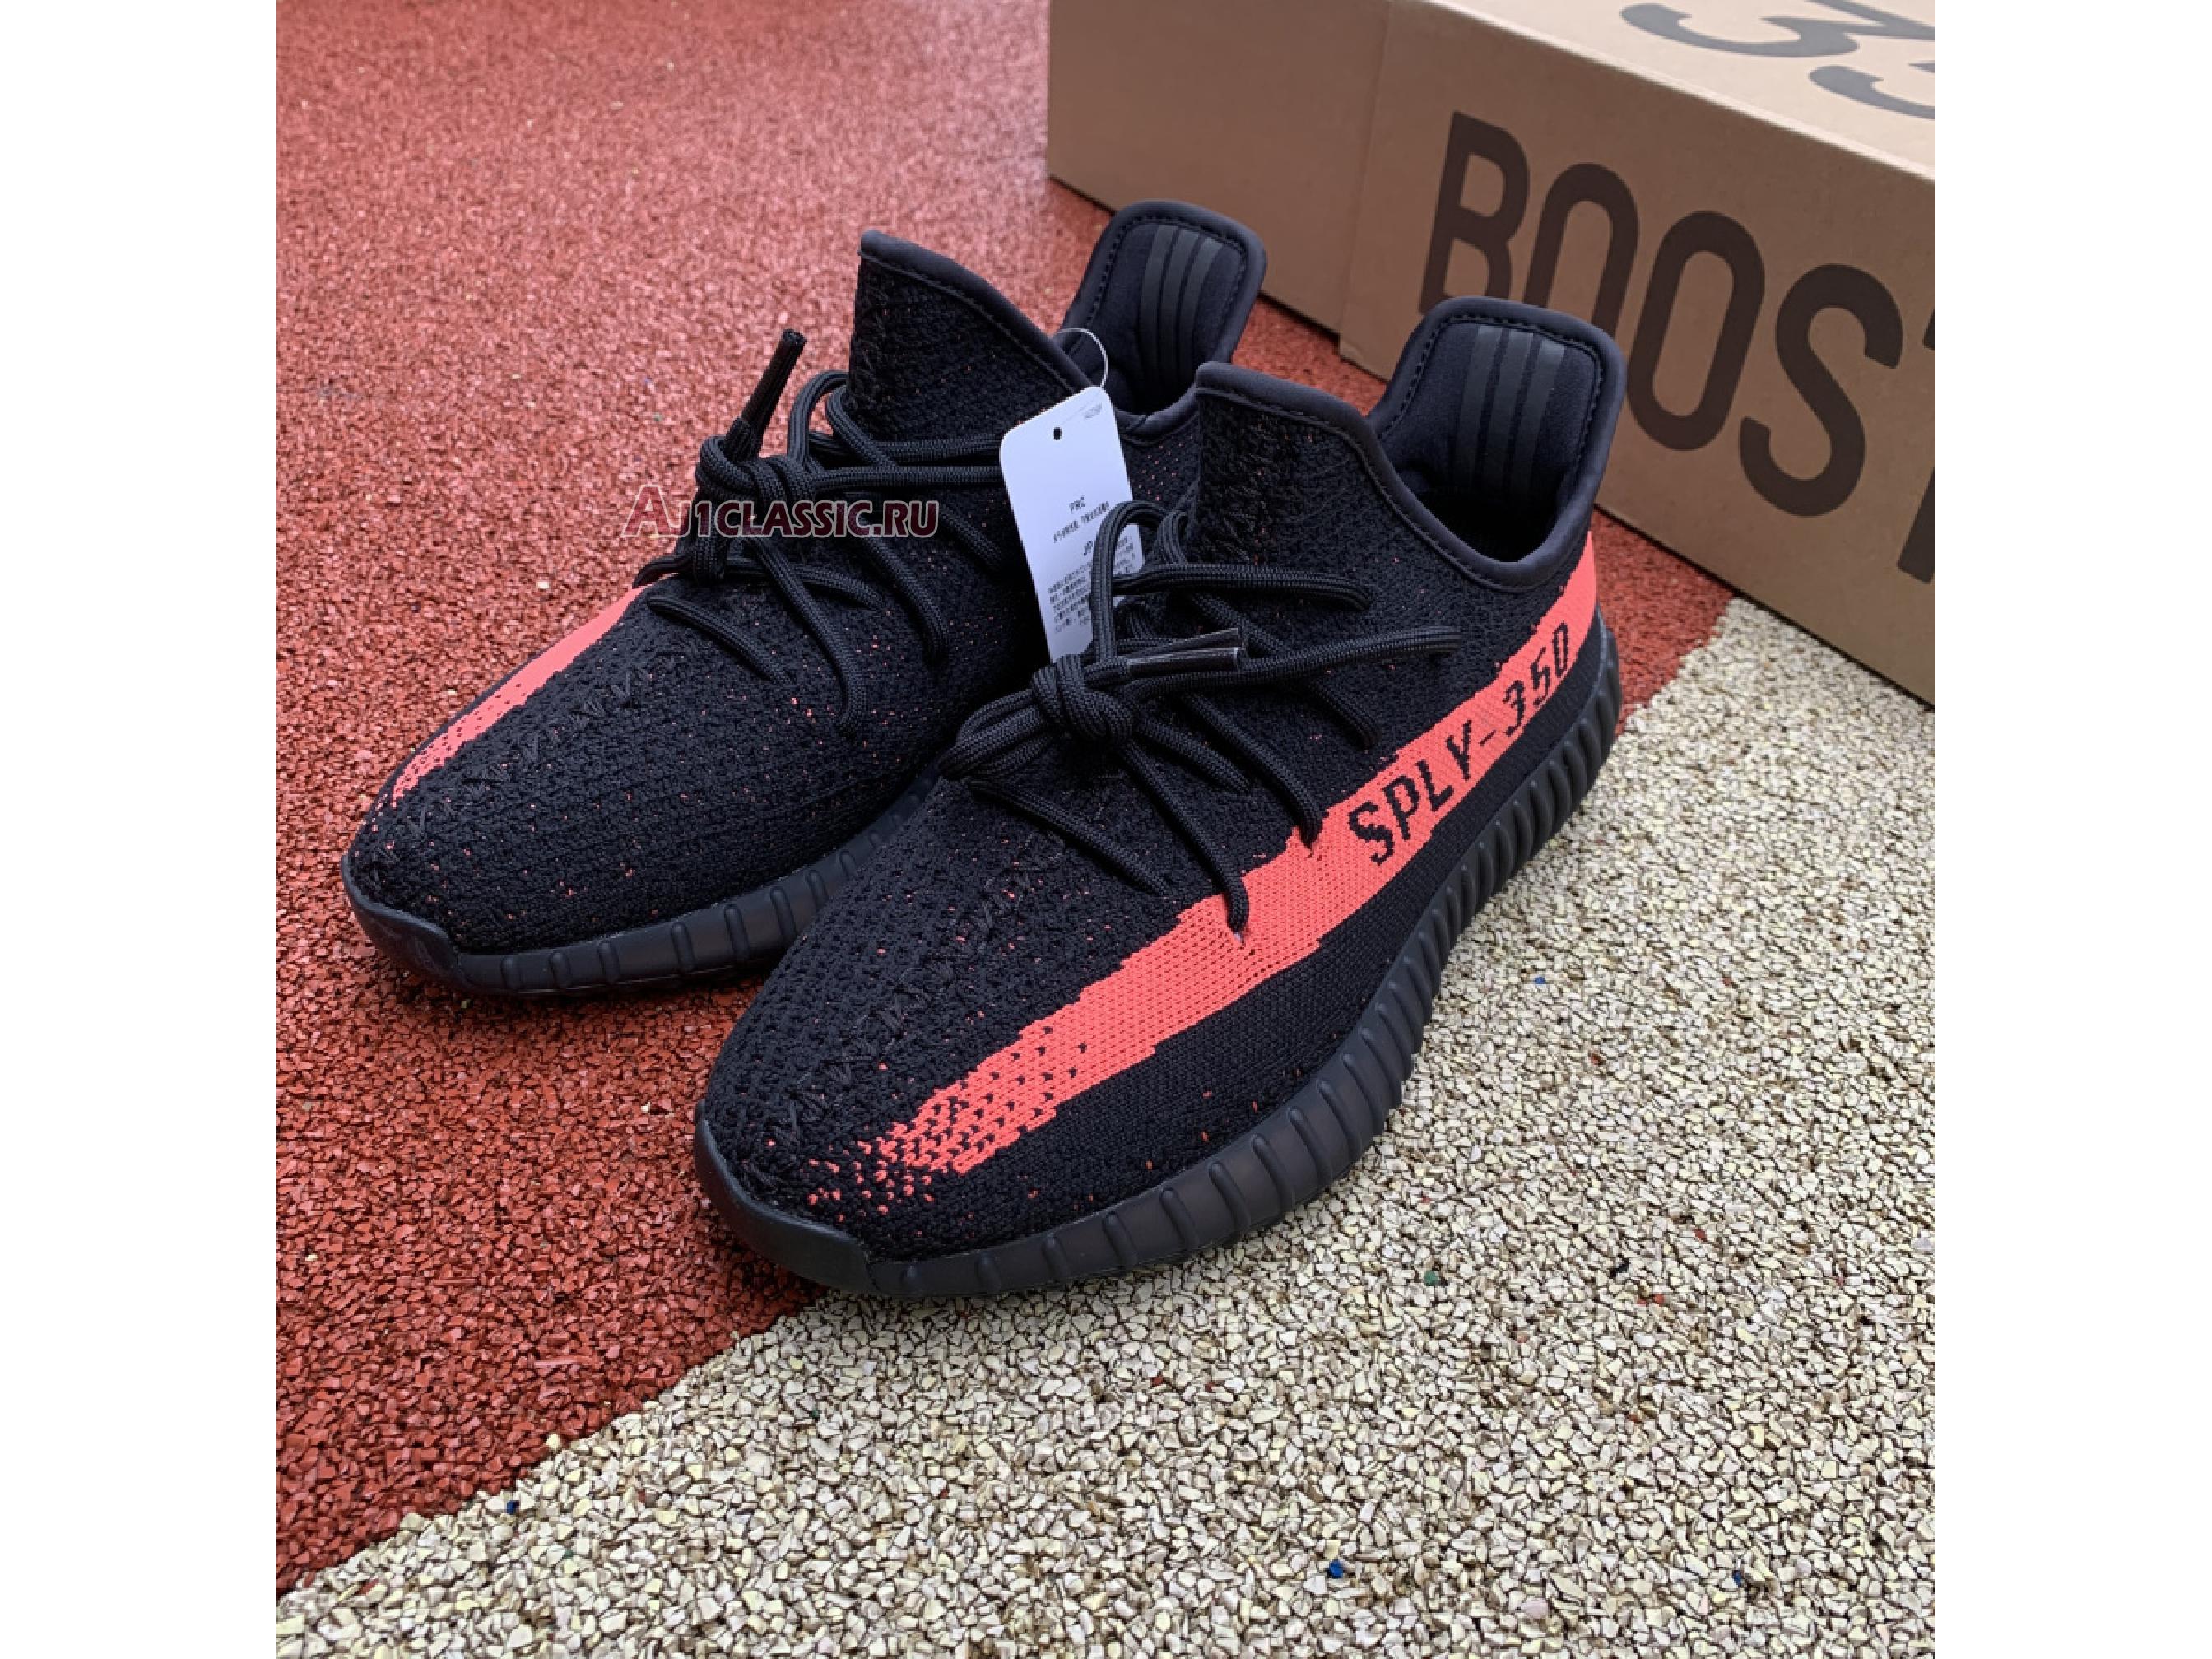 Adidas Yeezy Boost 350 V2 "Red" BY9612